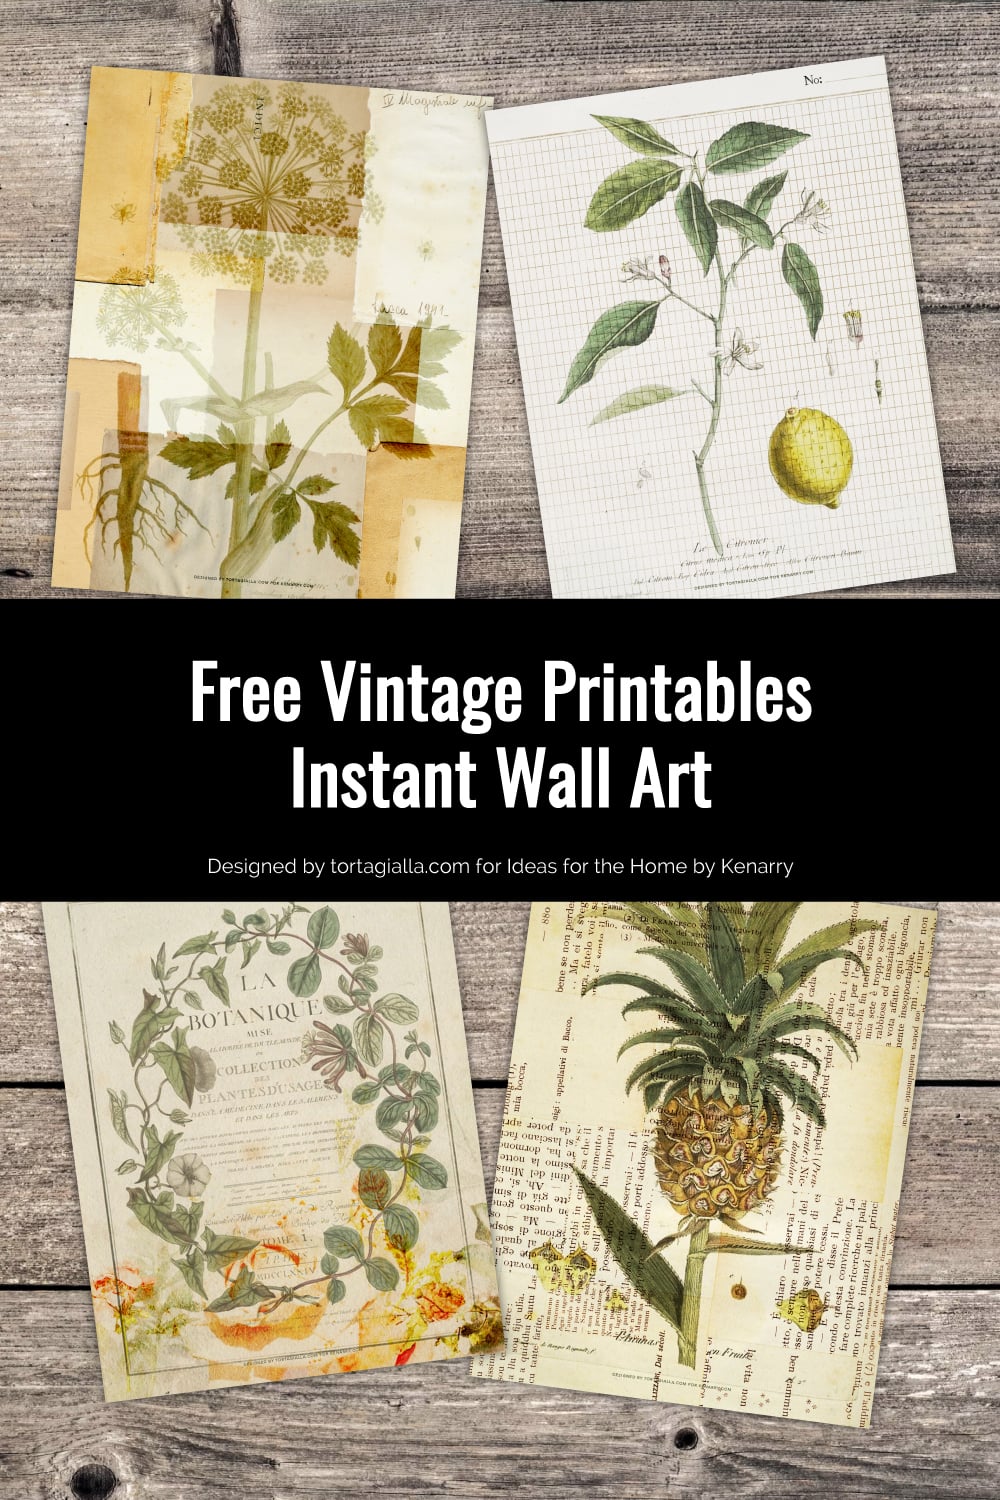 Preview of four vintage paper and botanical style art prints on wooden planks background.